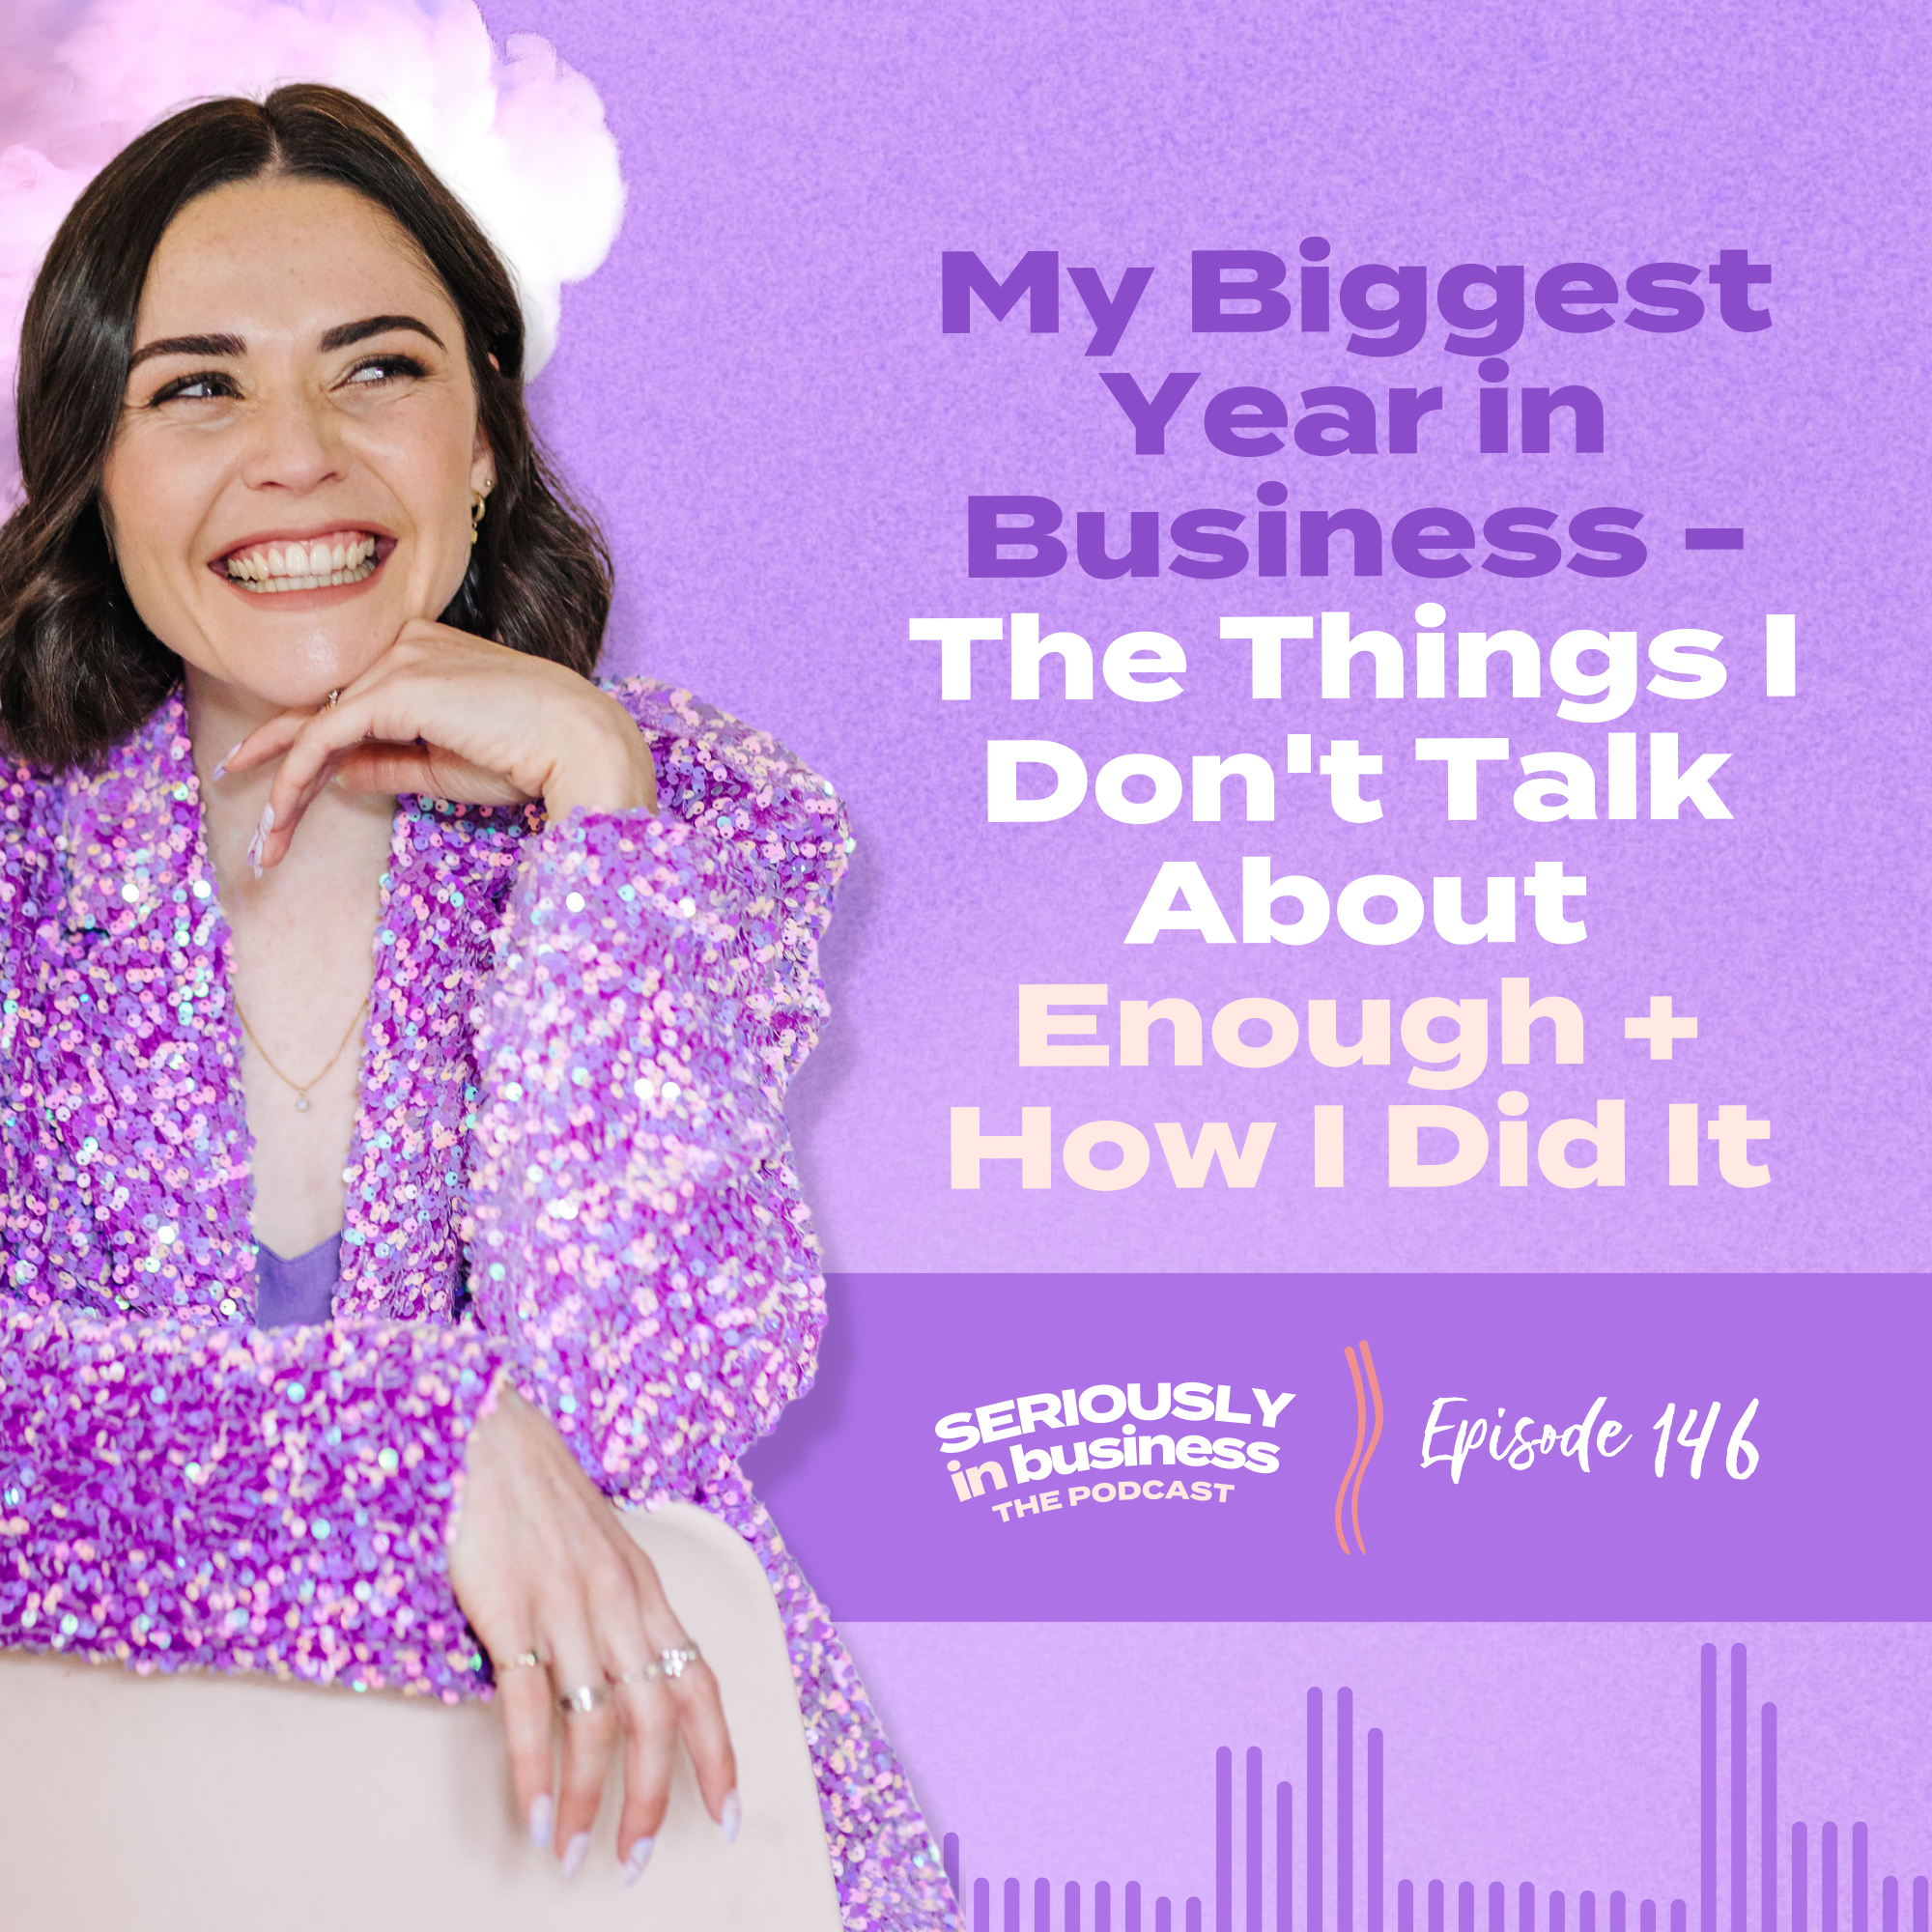 146: My Biggest Year in Business - The Things I Don't Talk About Enough + How I Did It